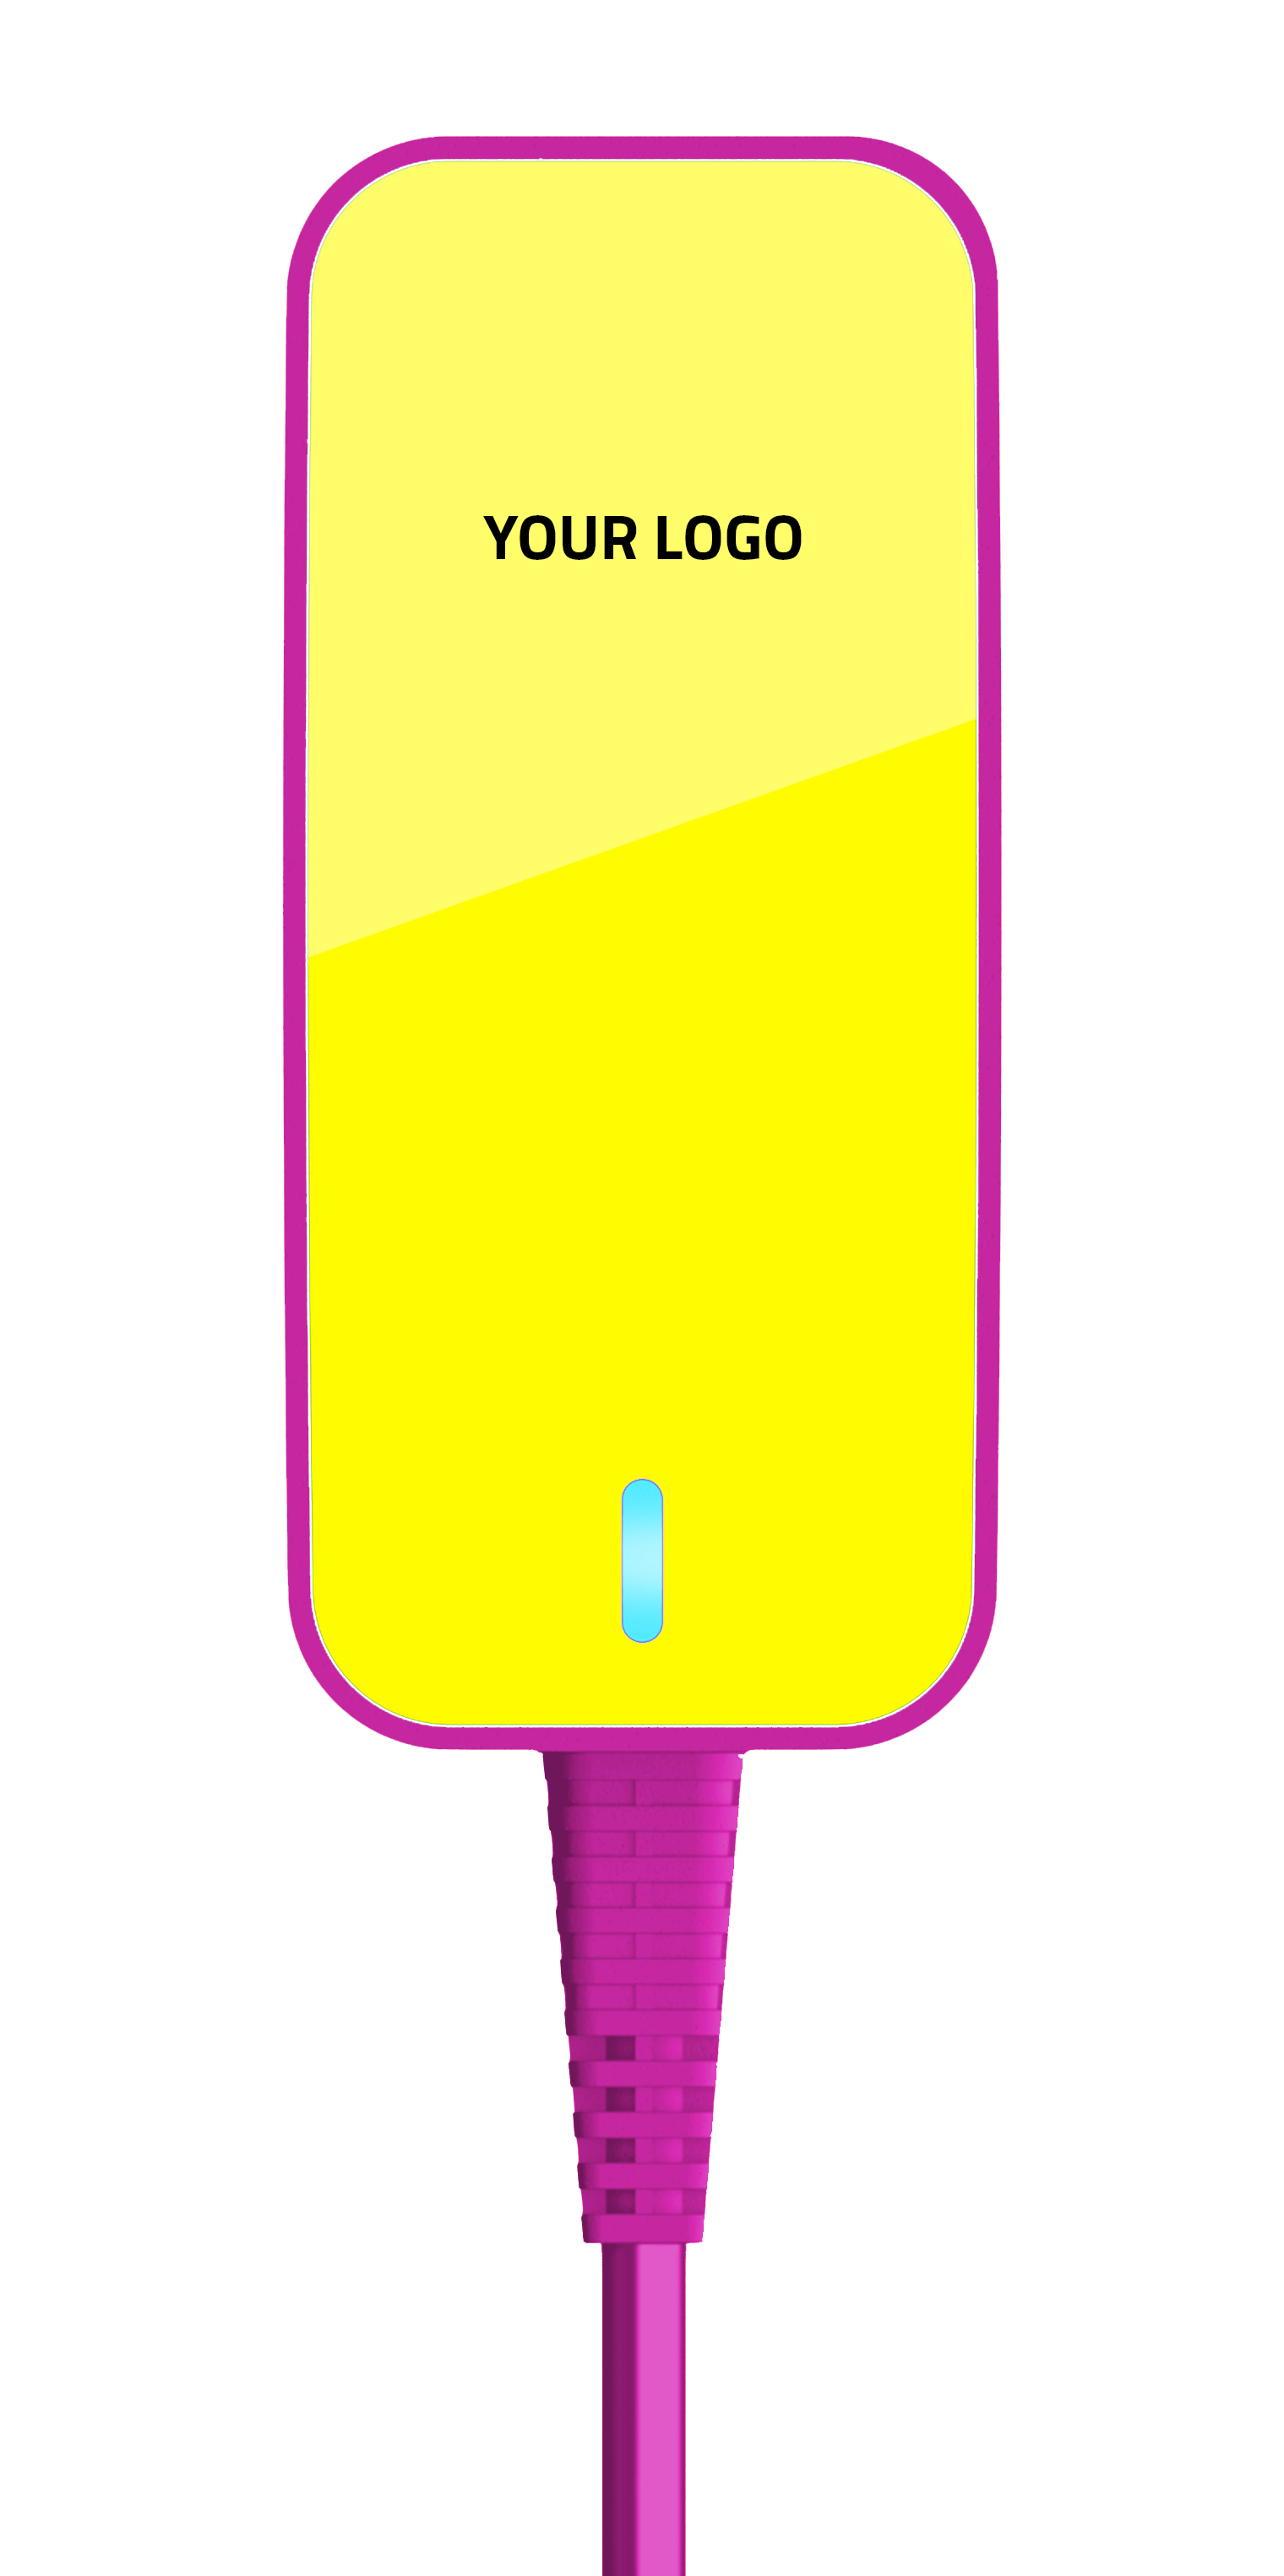 A yellow power supply charger with a blue light on it and pink trim.